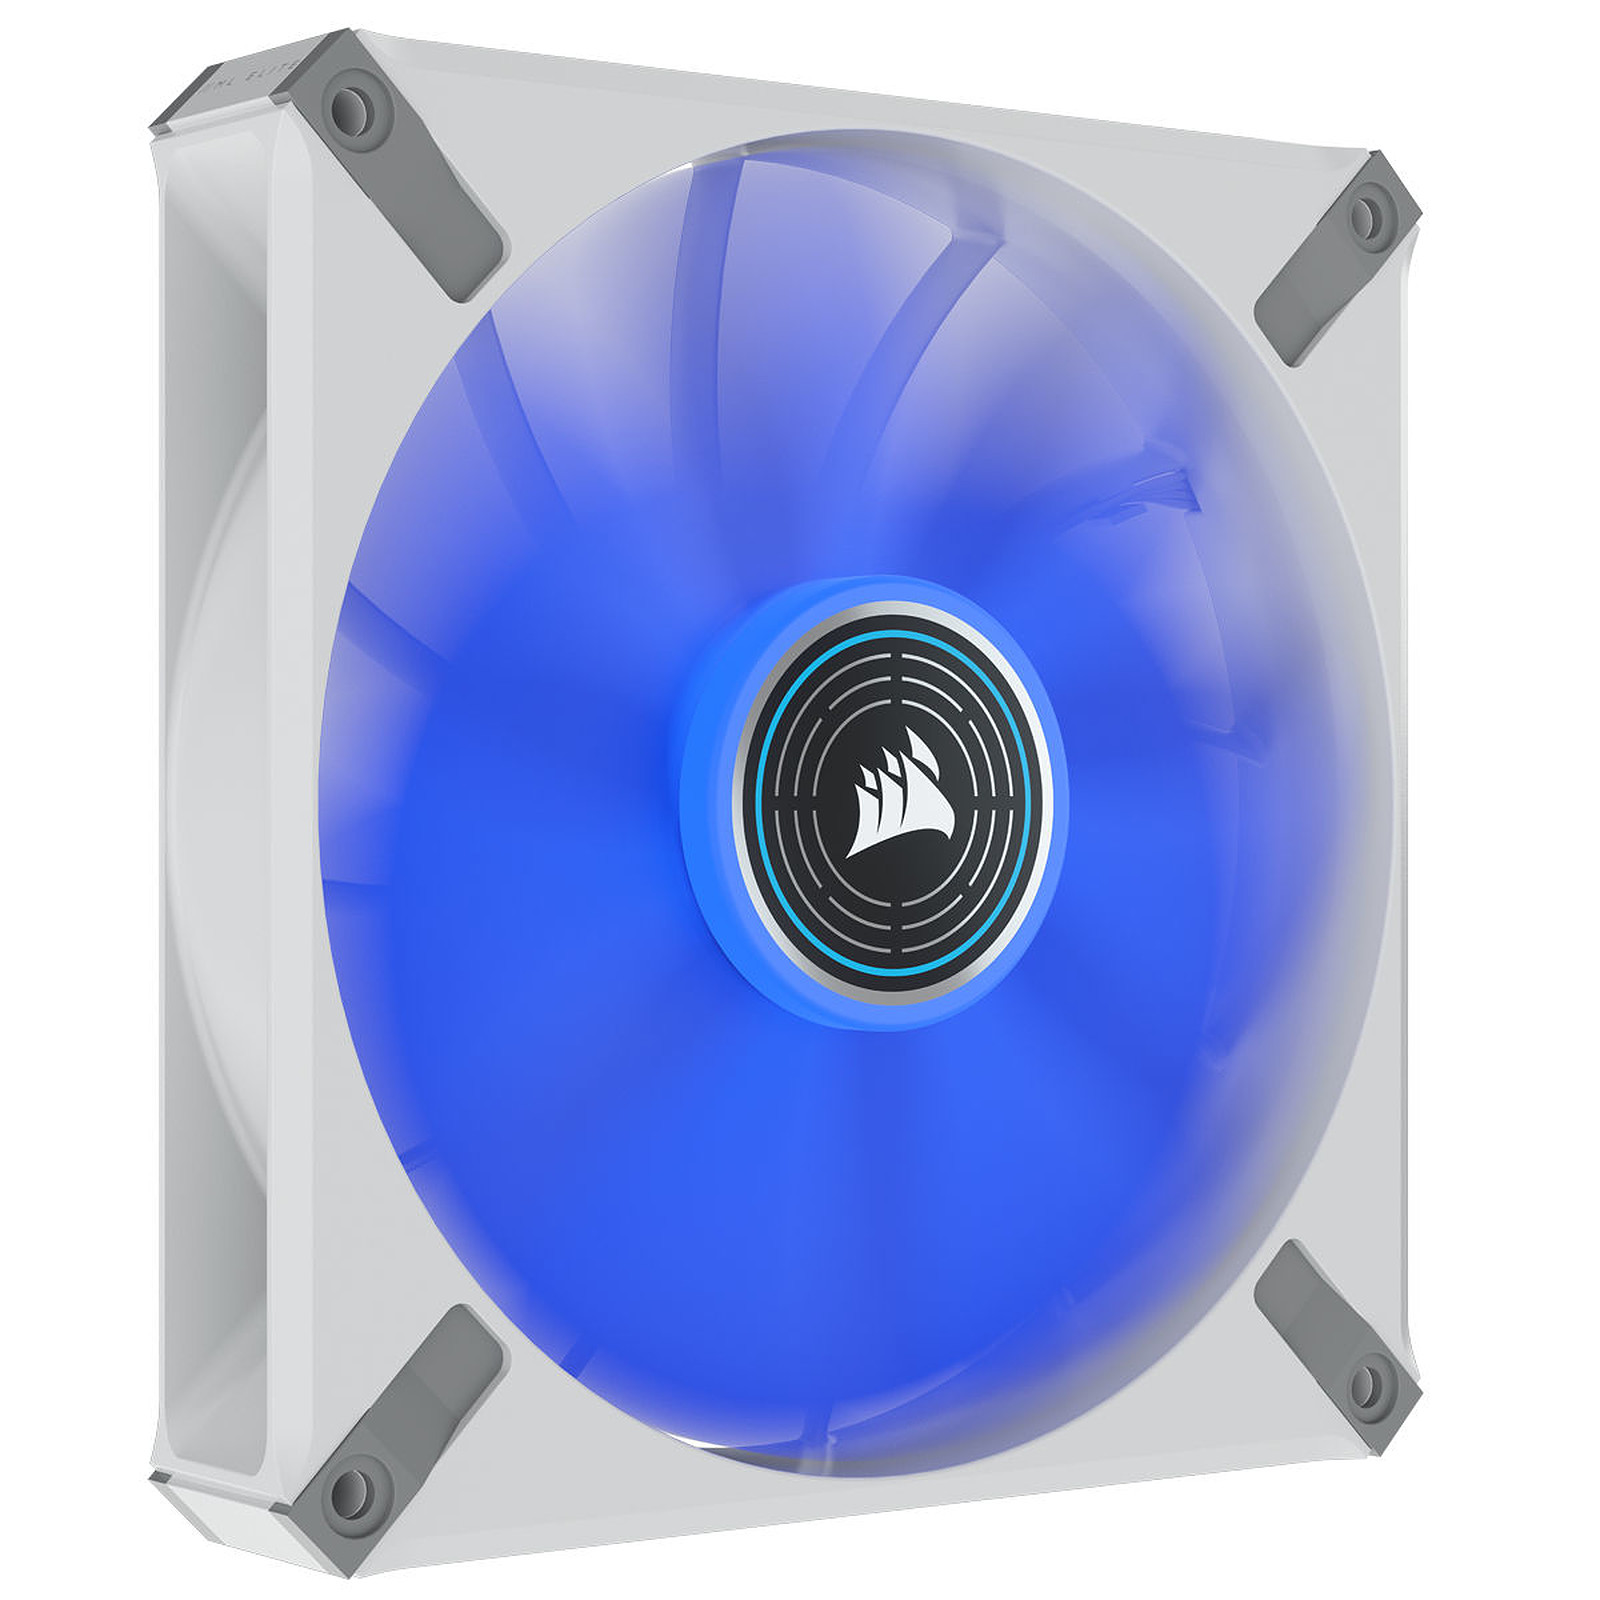 Corsair Co-9050131-Ww Ml140 Elite White With 8x Blue Leds 140x140x25mm Premium Magnetic Levitation Bearing 7 Blades Pwm Fans With Airguide 400-1600rpm 10-32dba 15-83cfm 0.3-2mm/H2o Static Pressure